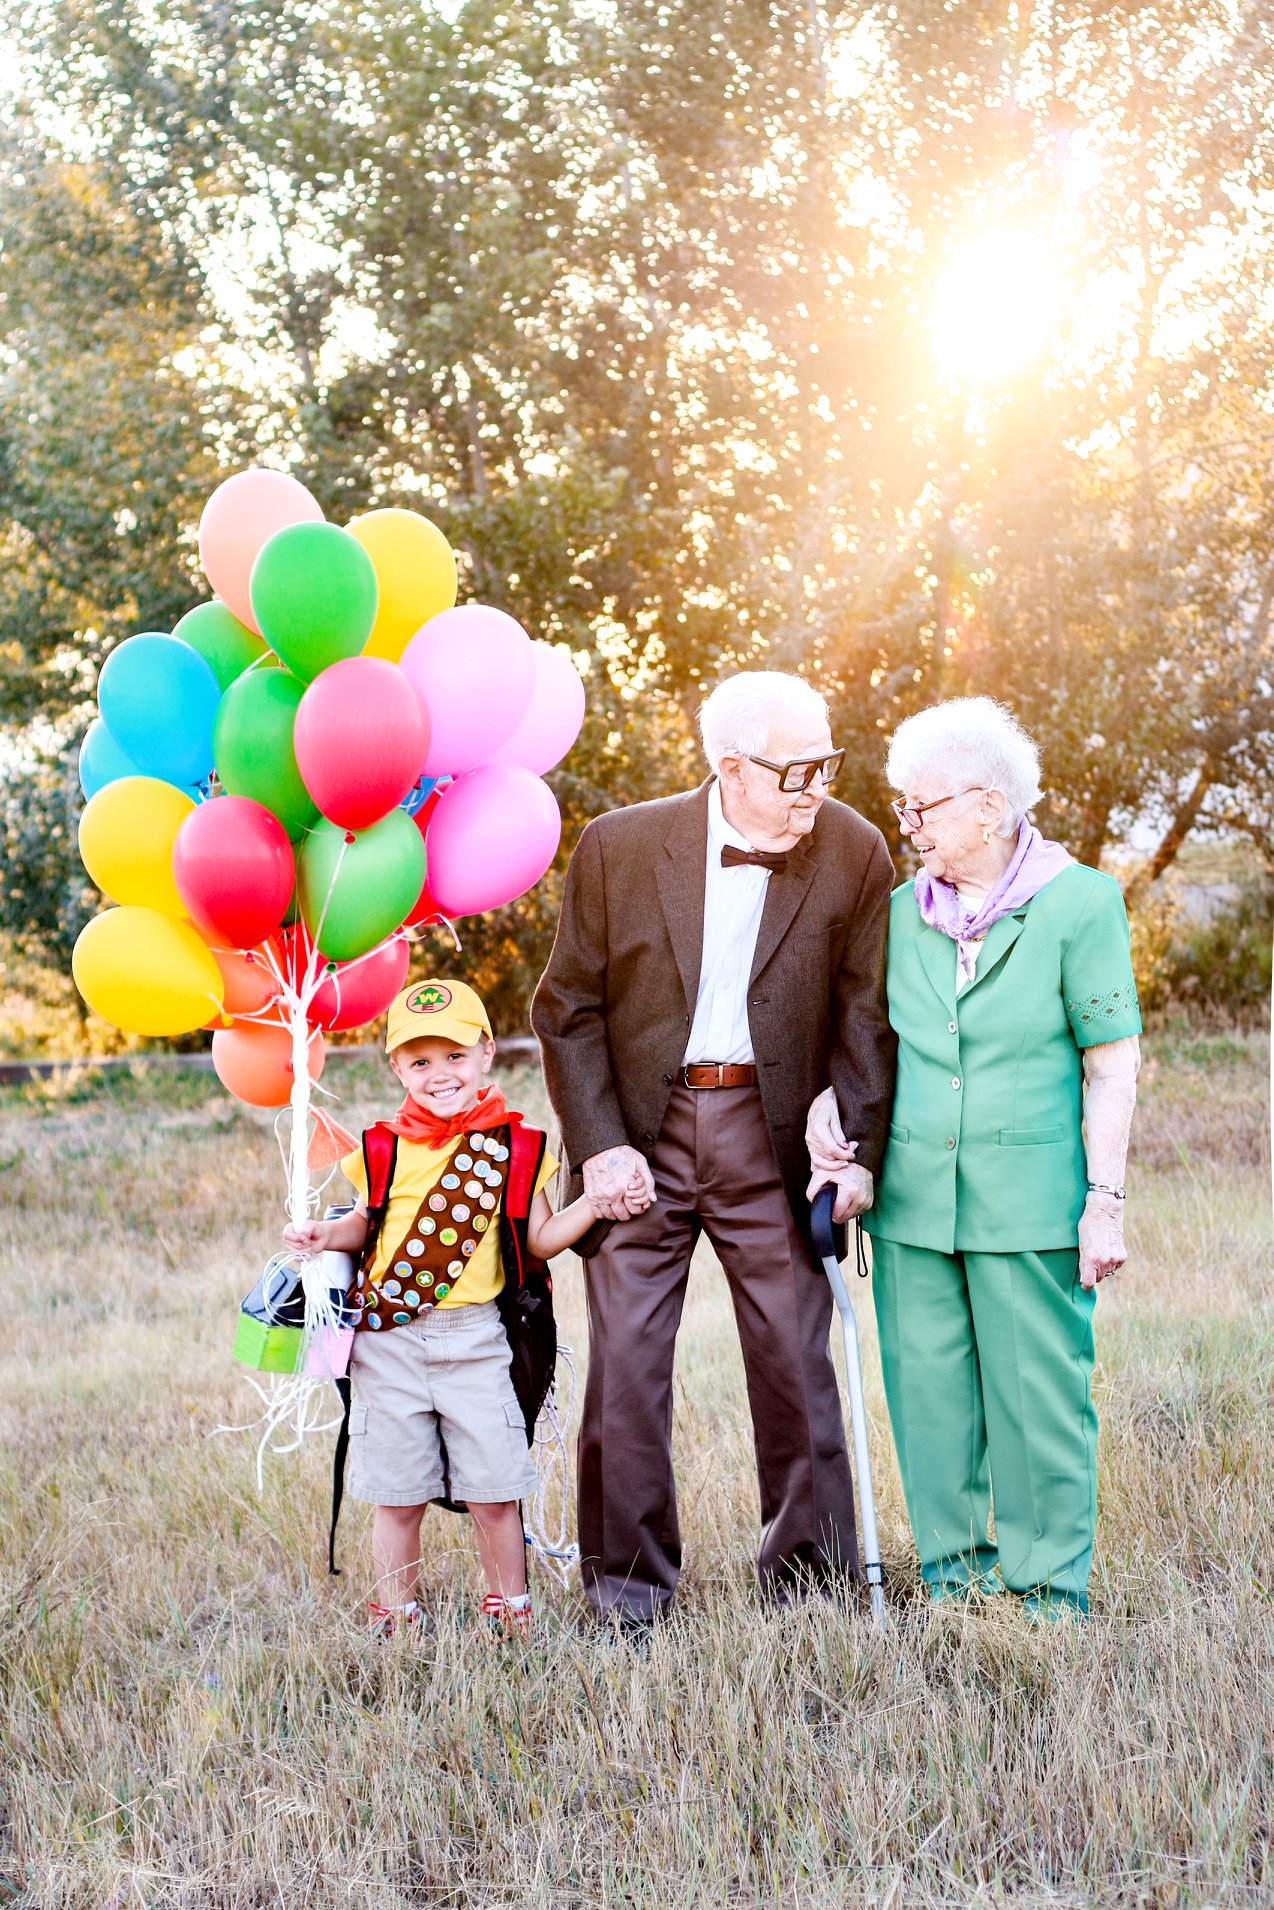 PHOTO: 5-year-old Elijah Perman poses next to his great-grandpa Richard and great-grandma Caroline in an 'Up'-themed photoshoot. 